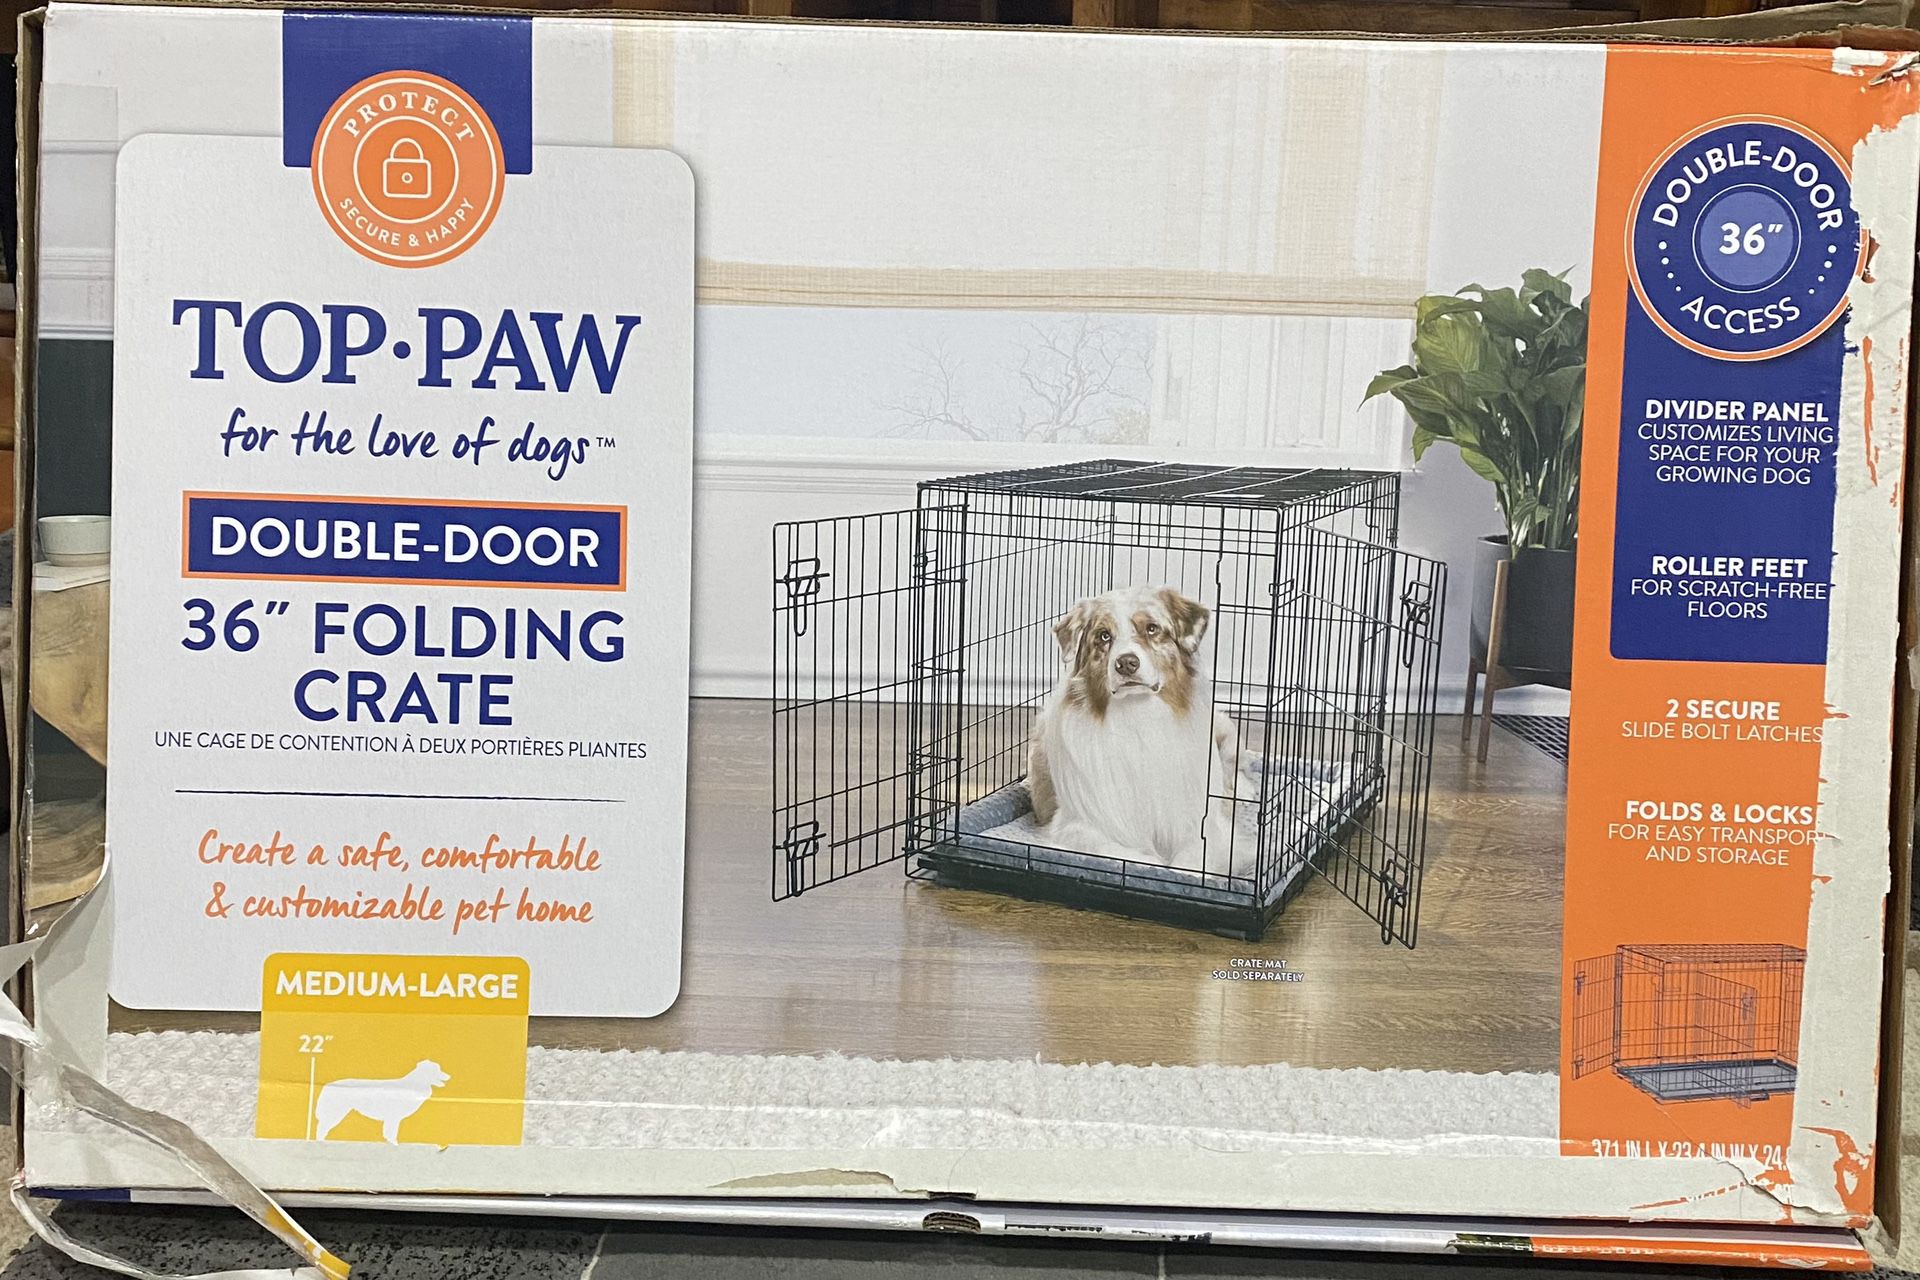 36” Top-Paw Folding Crate